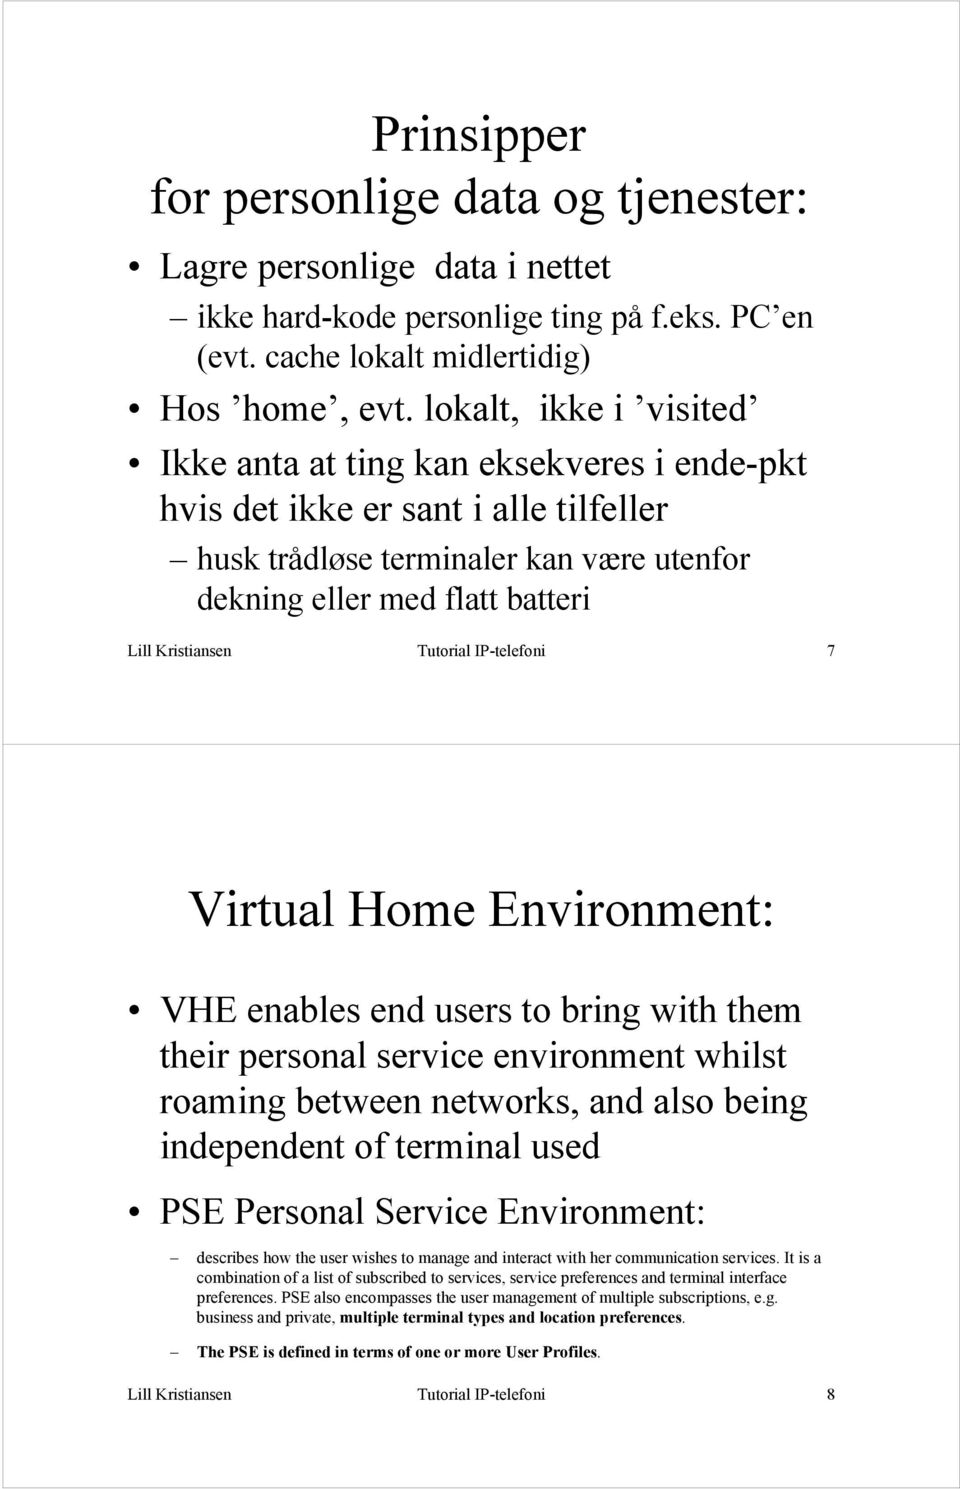 Tutorial IP-telefoni 7 Virtual Home Environment: VHE enables end users to bring with them their personal service environment whilst roaming between networks, and also being independent of terminal